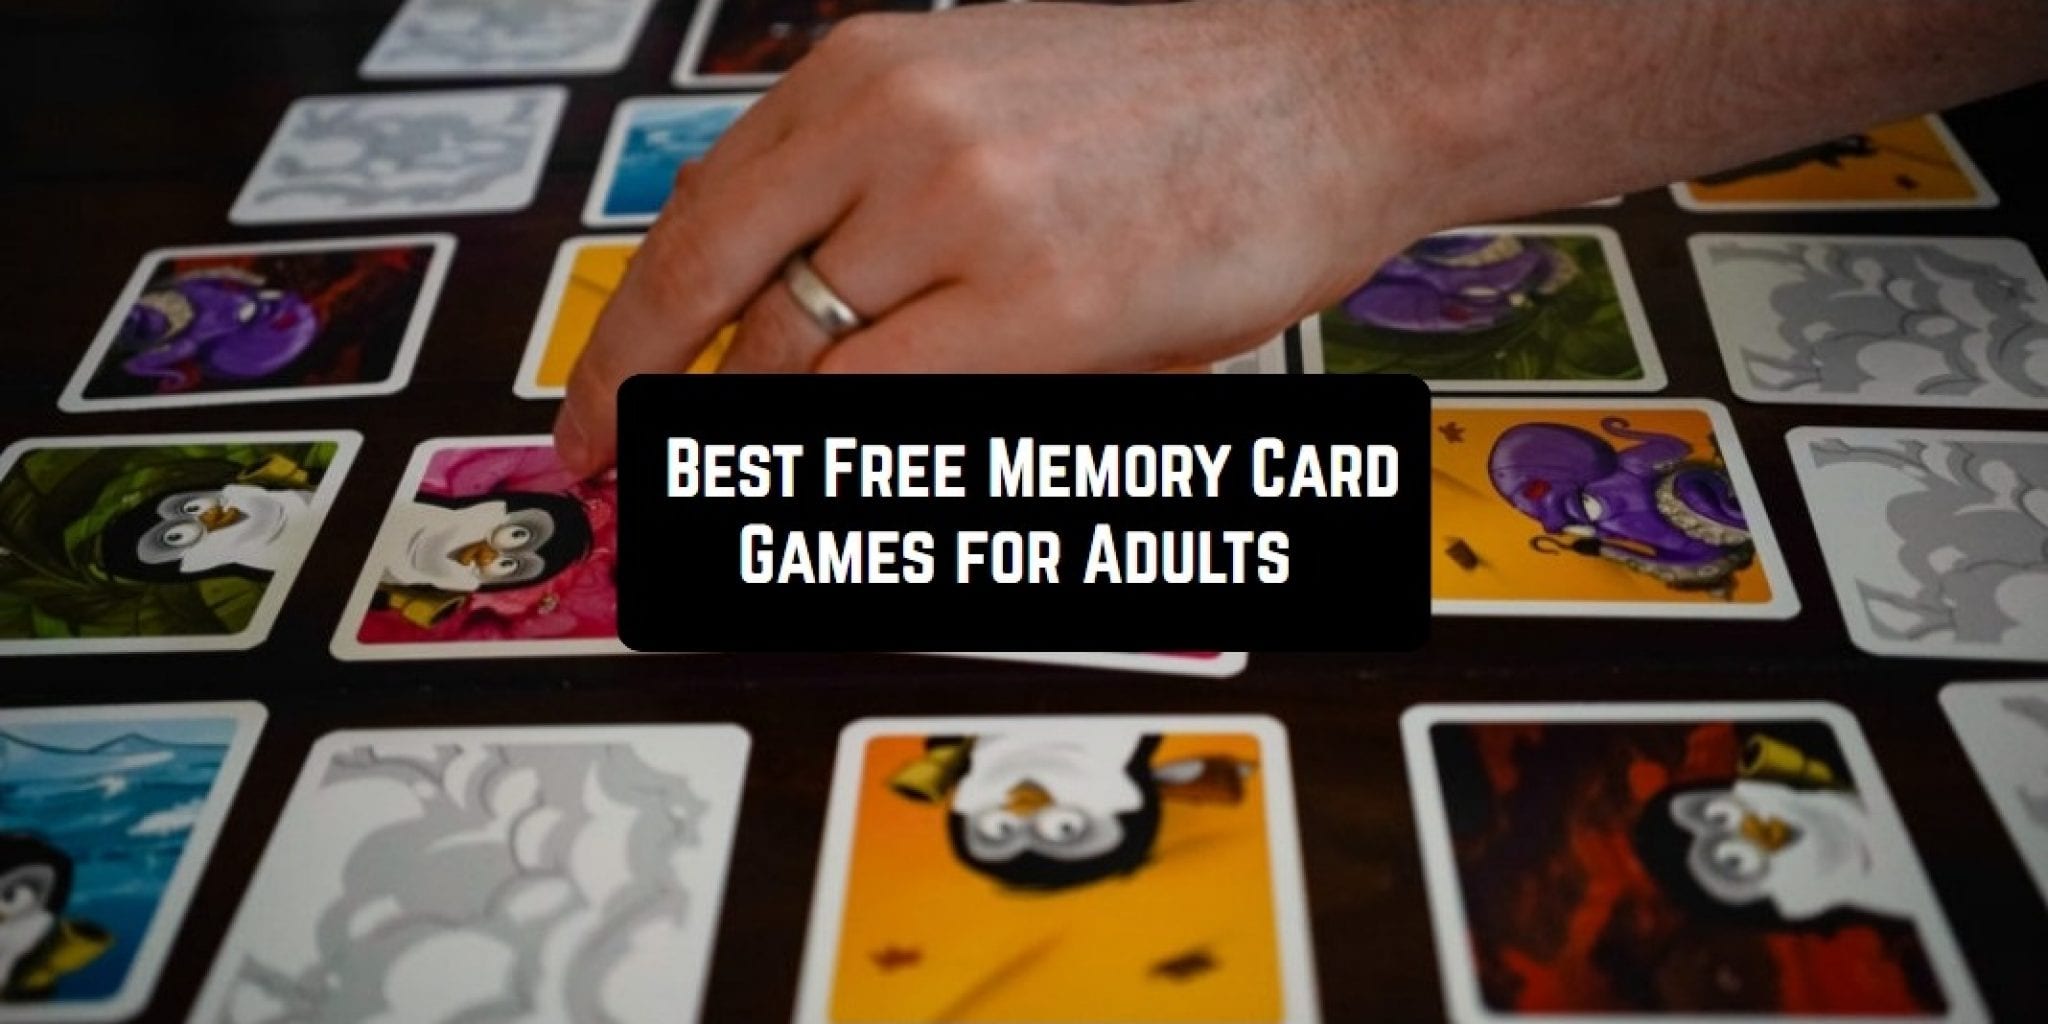 10-free-memory-card-games-for-adults-android-ios-freeappsforme